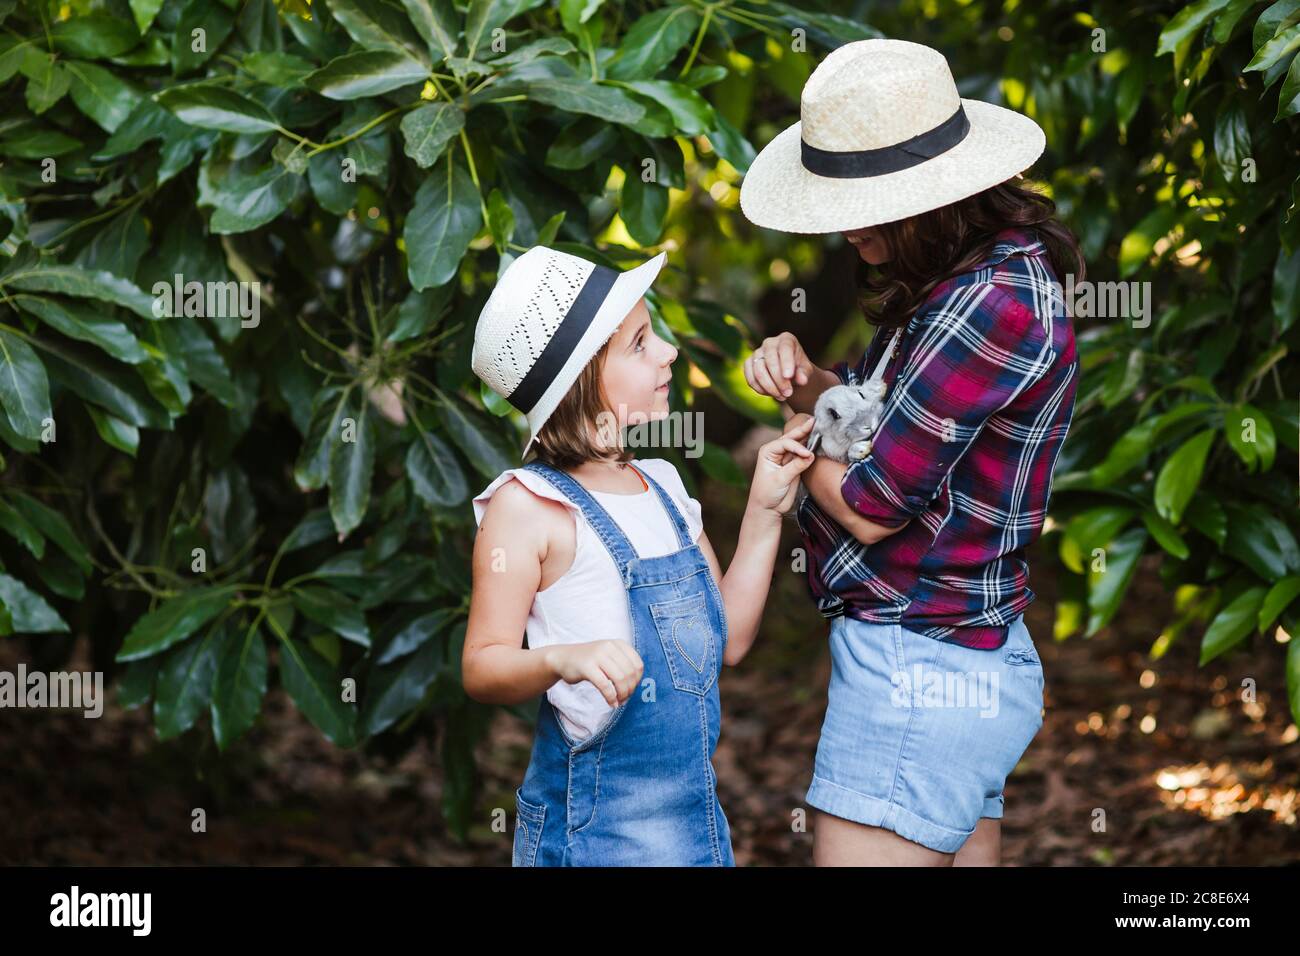 Mother and daughter stroking rabbit in garden Stock Photo